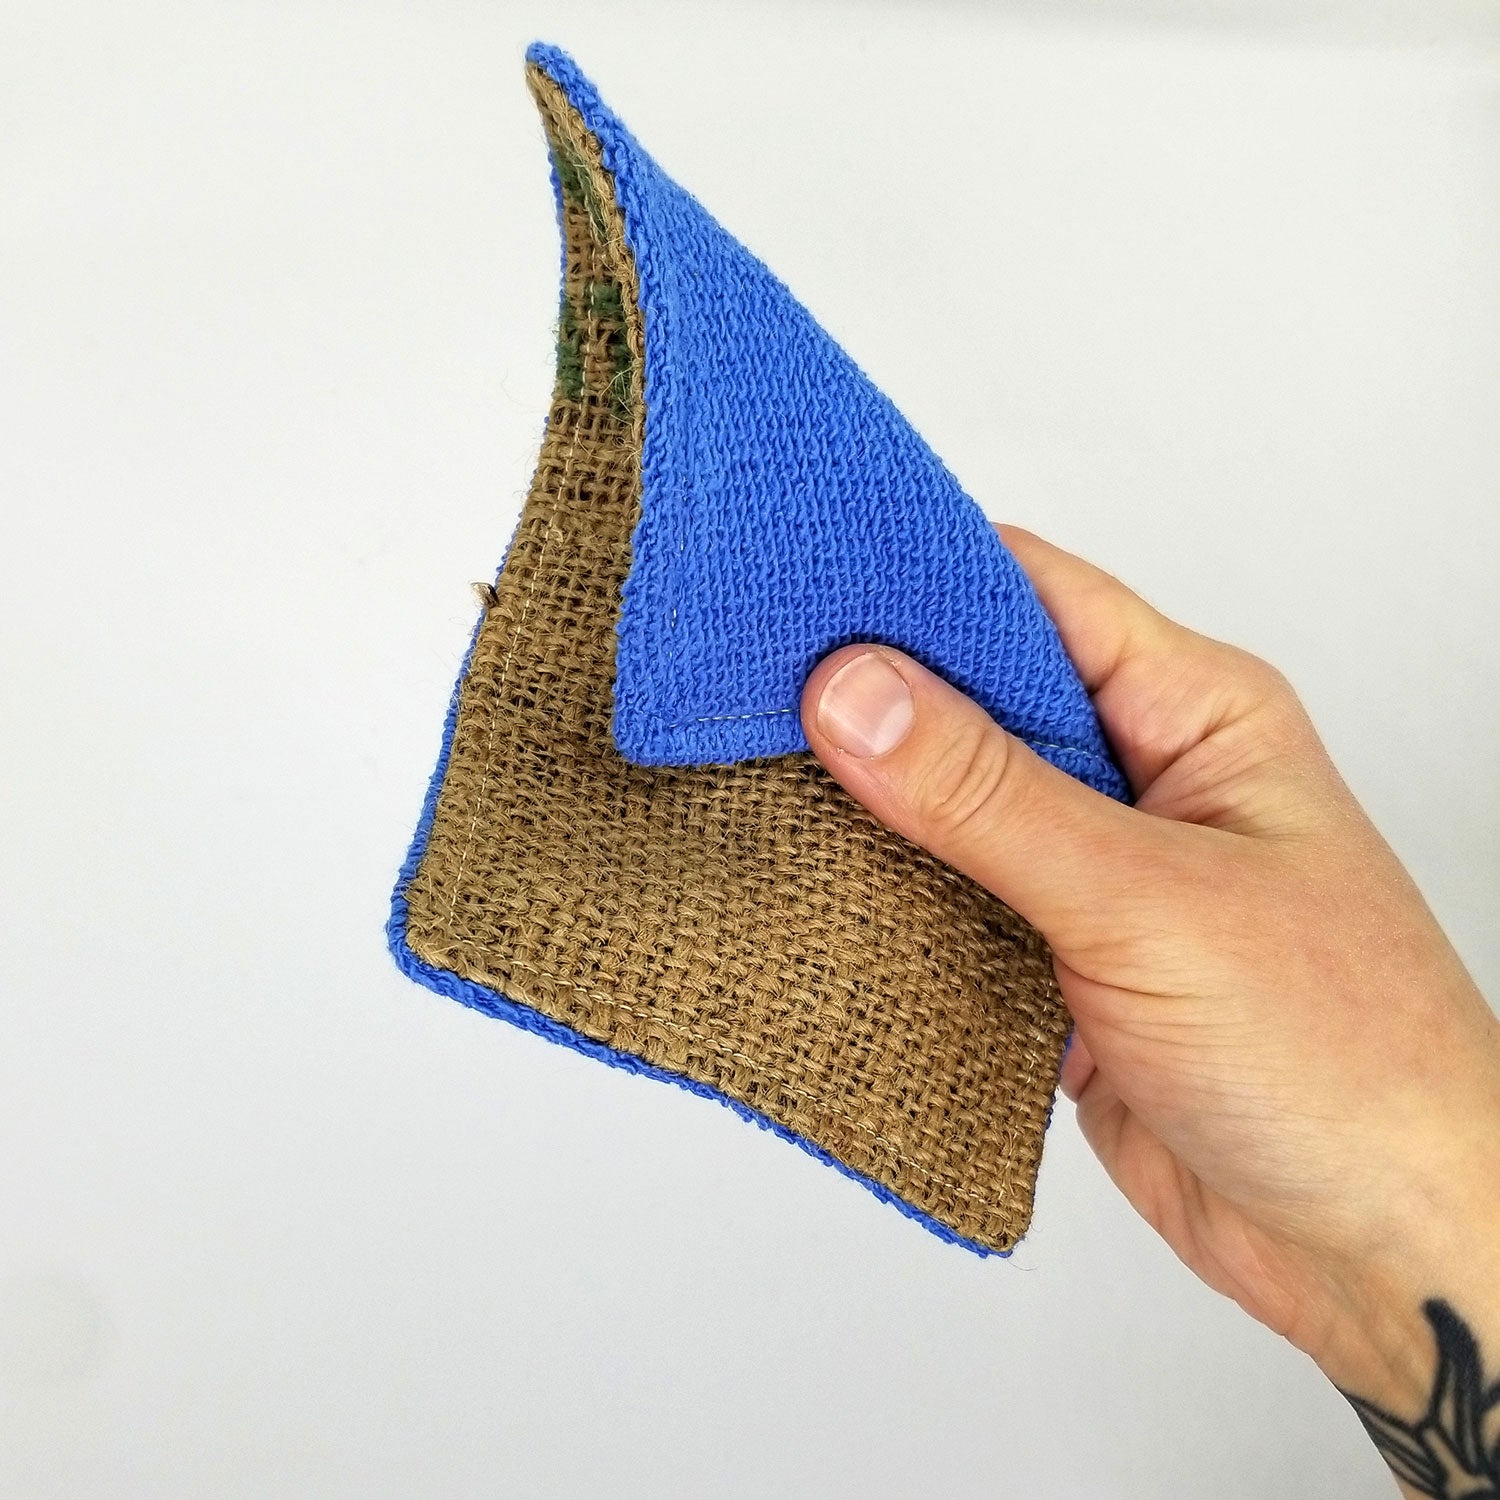 a hand holds up an upcycled dish scrubber, showing both the burlap and terry cloth sides